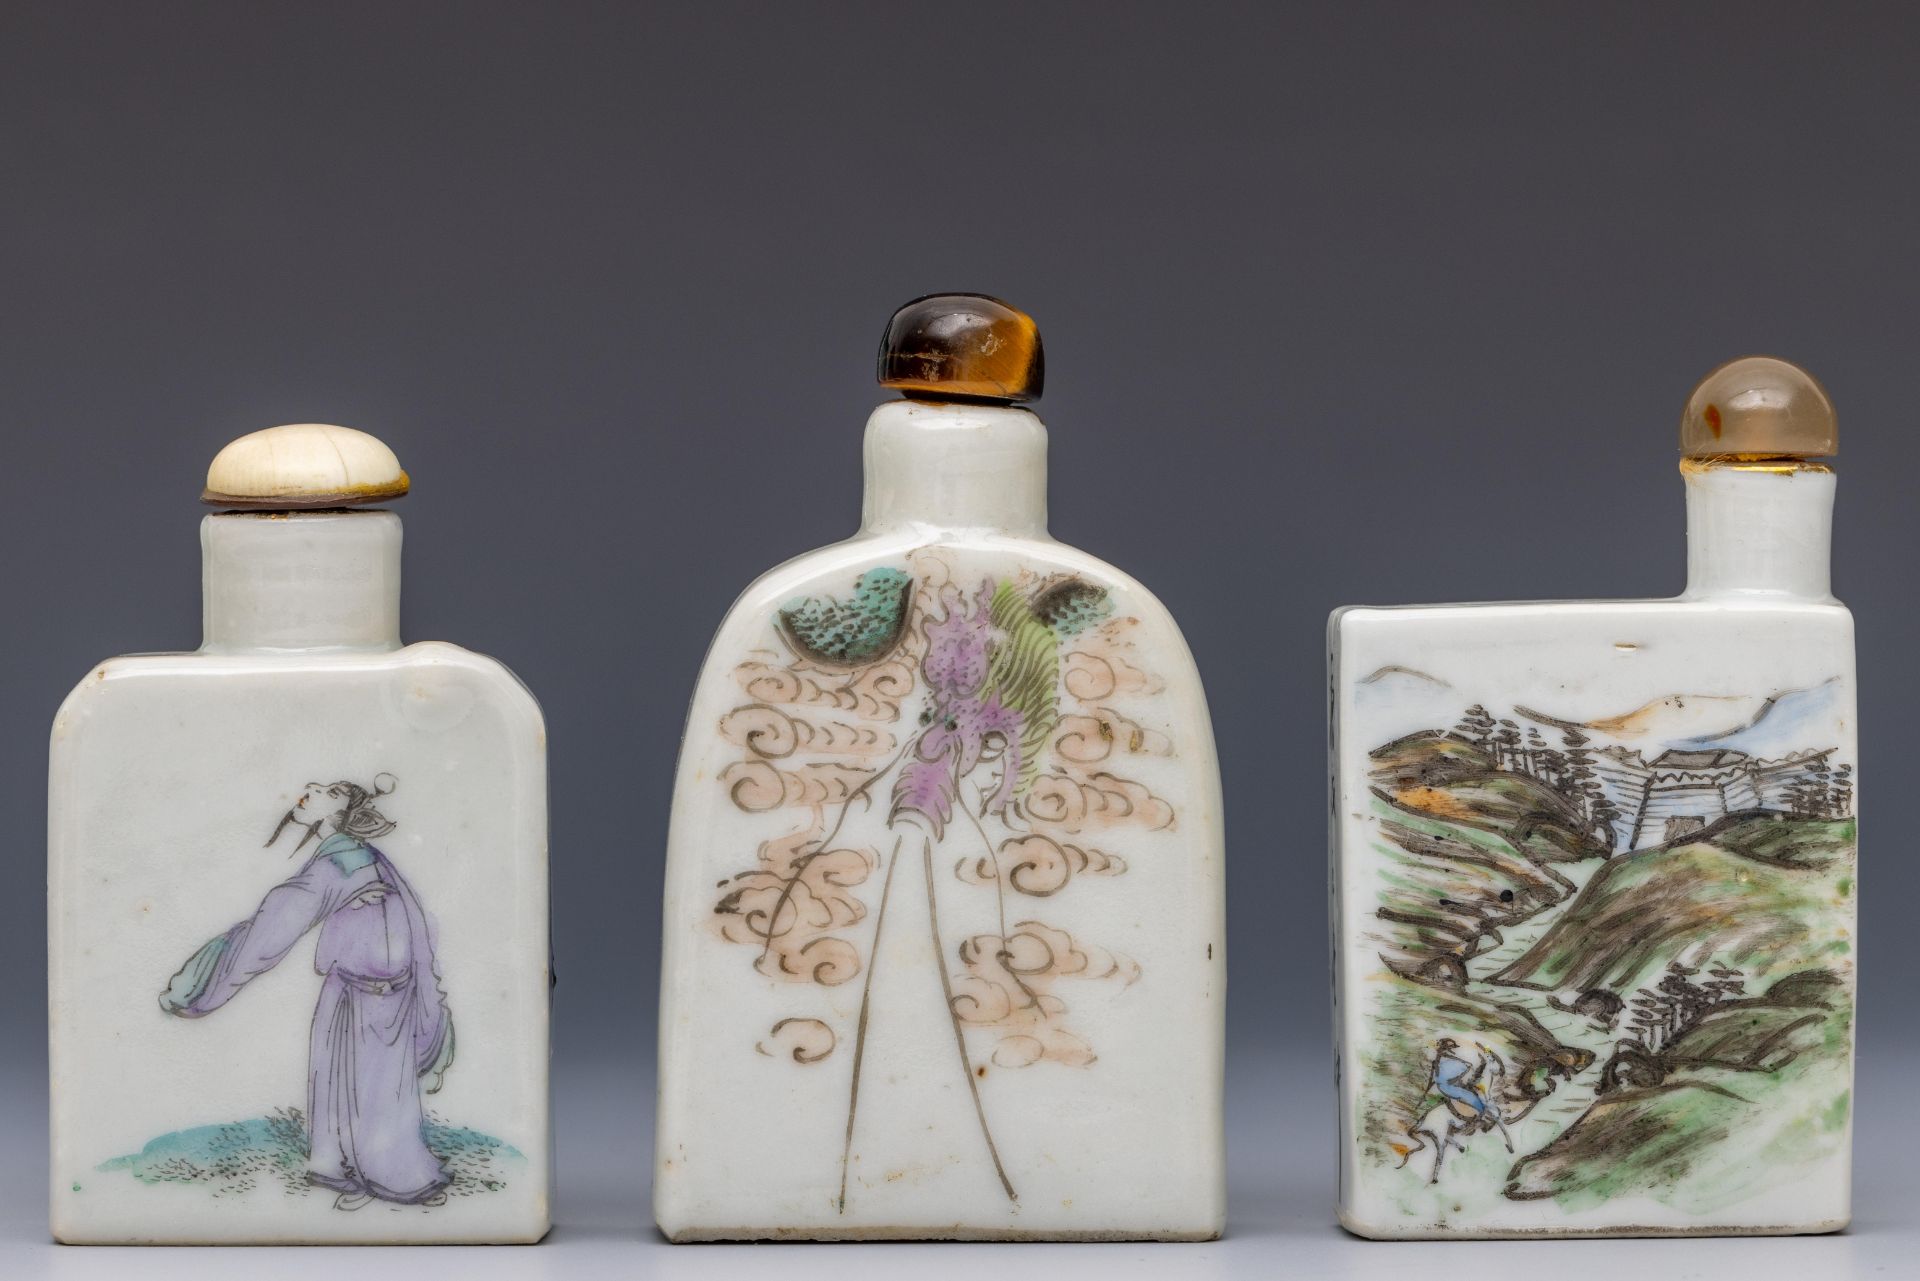 China, three polychrome decorated porcelain figural snuff bottles and stoppers, late Qing dynasty (1